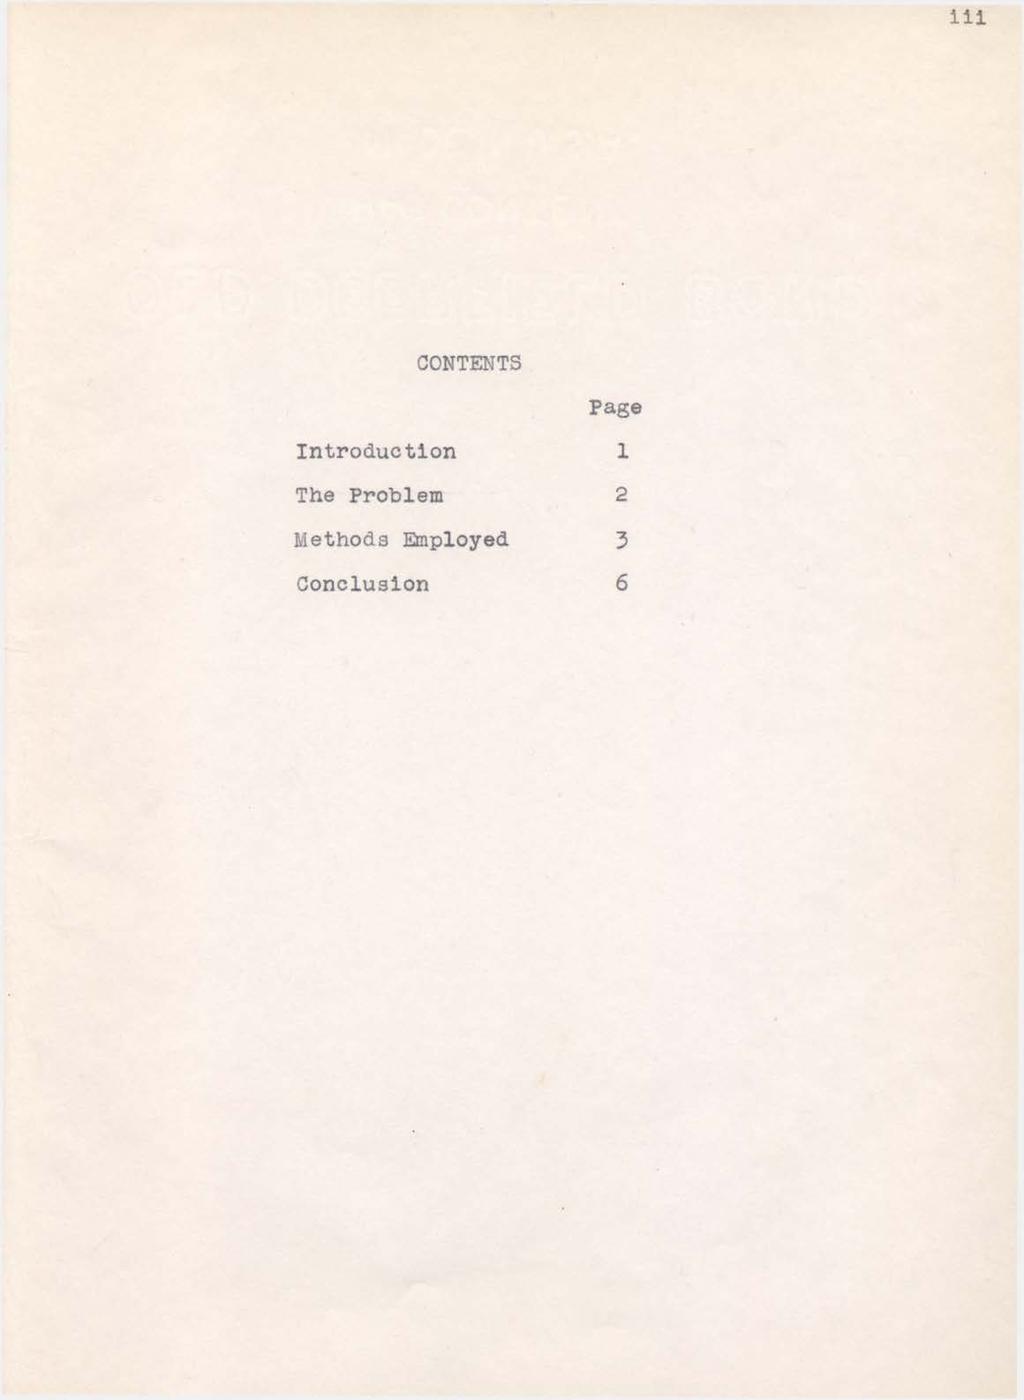 iii CONTENTS Page Introduction 1 The